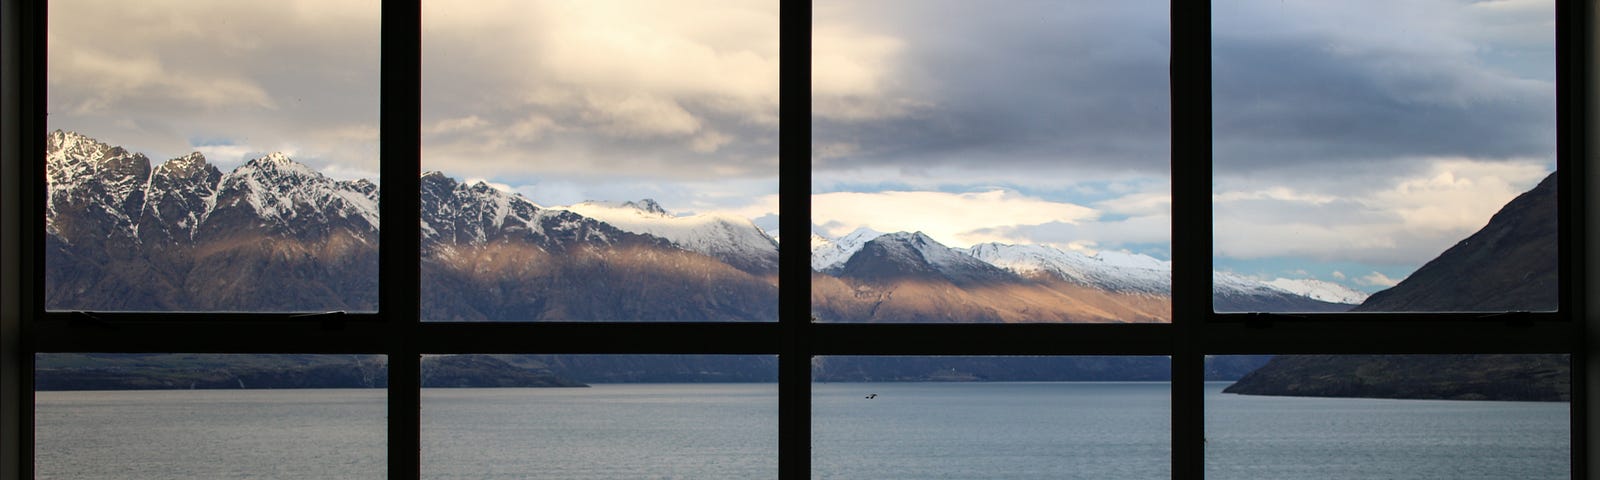 A window view with lake in the mountains